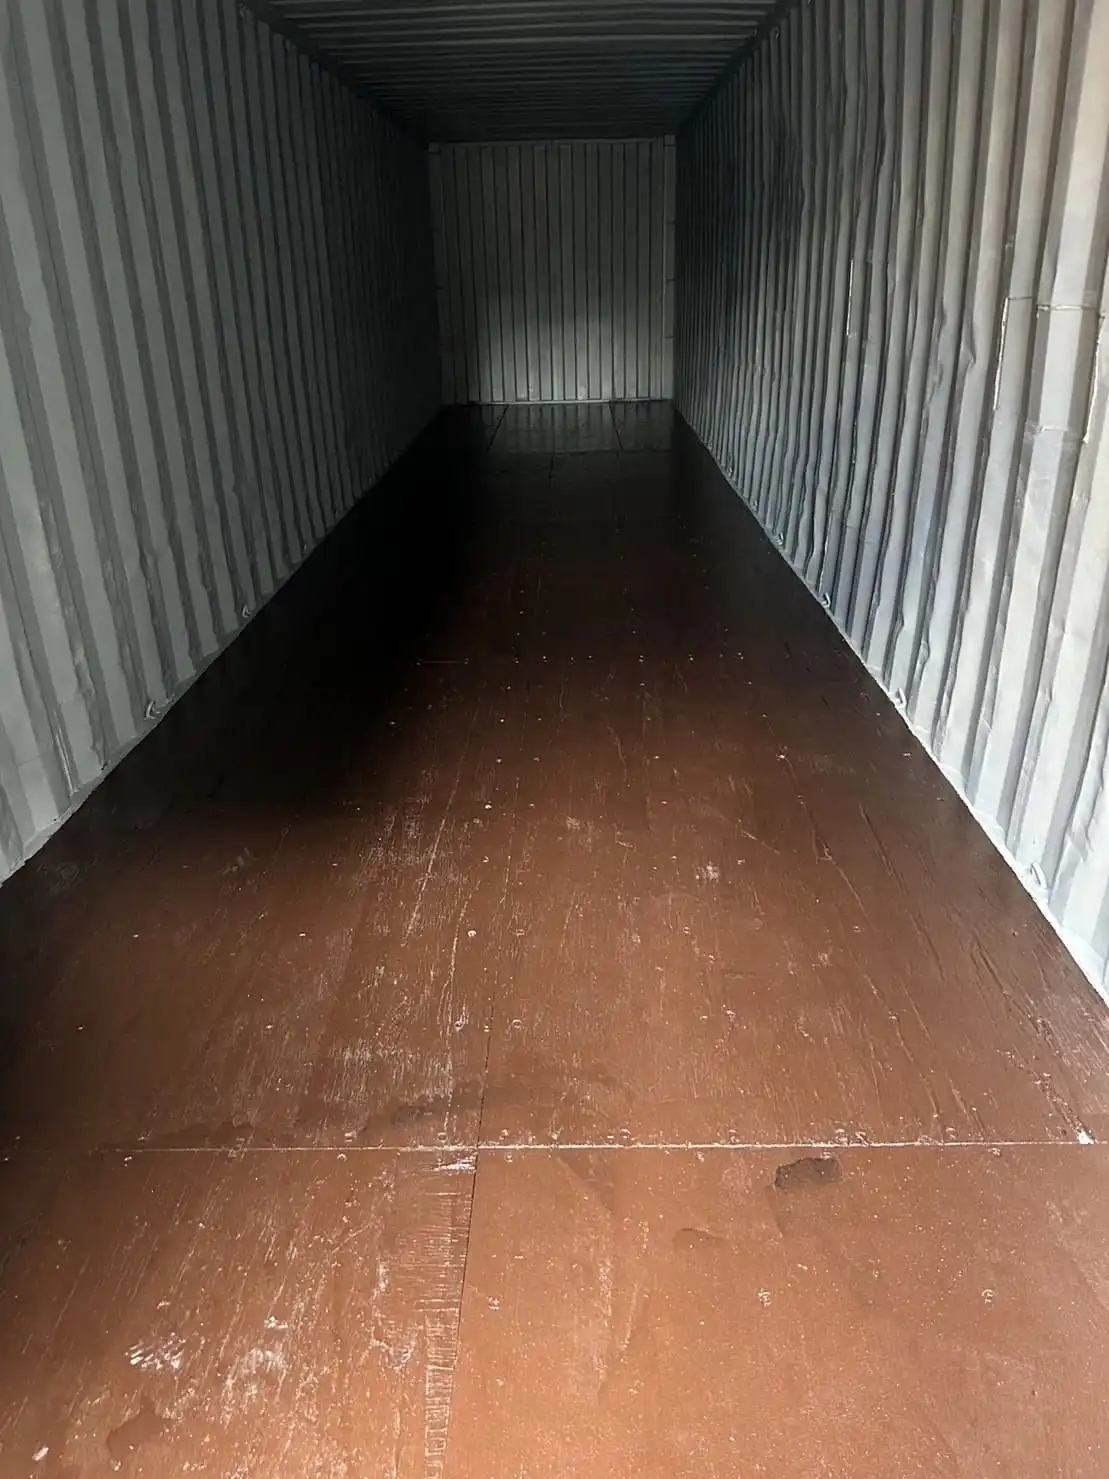 container lam kho 40 feet